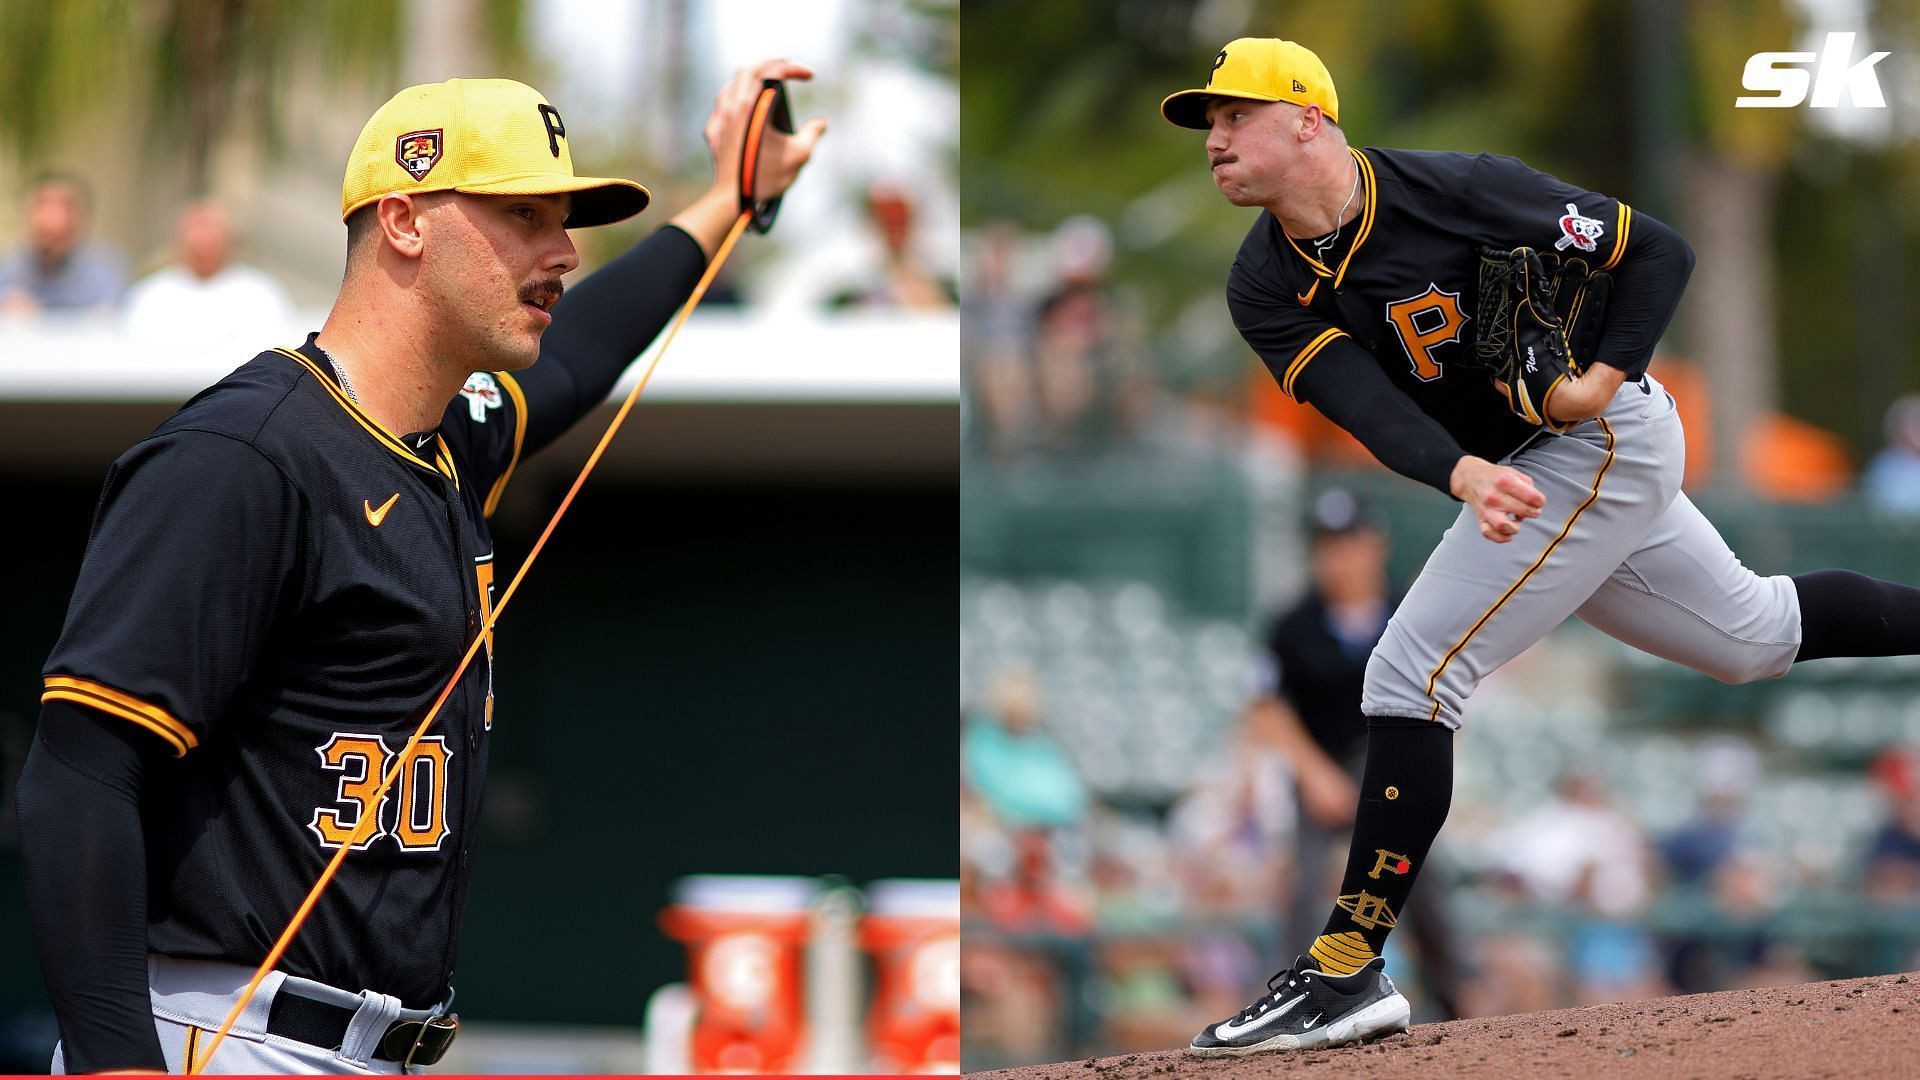 Paul Skenes is set to make his MLB debut for the Pittsburgh Pirates